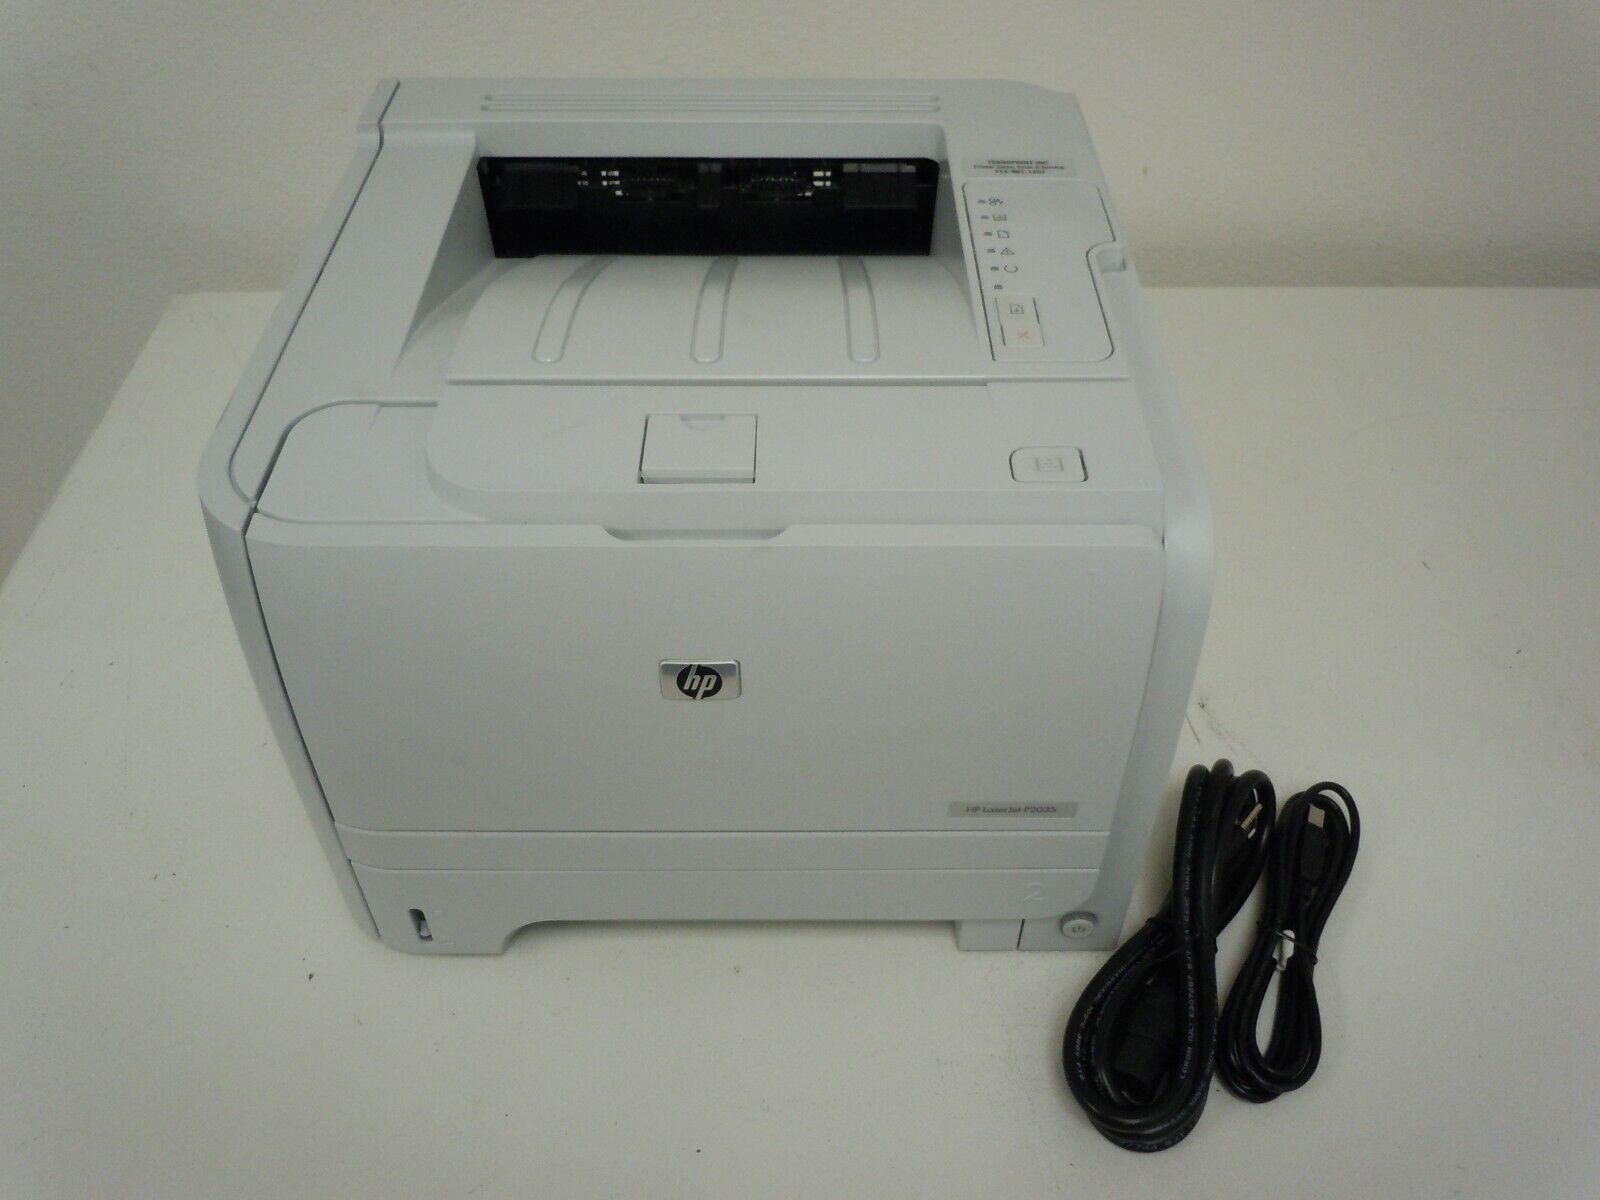 Mint Condition HP LaserJet P2035N Printer w/Network USB + New Cables + Warranty